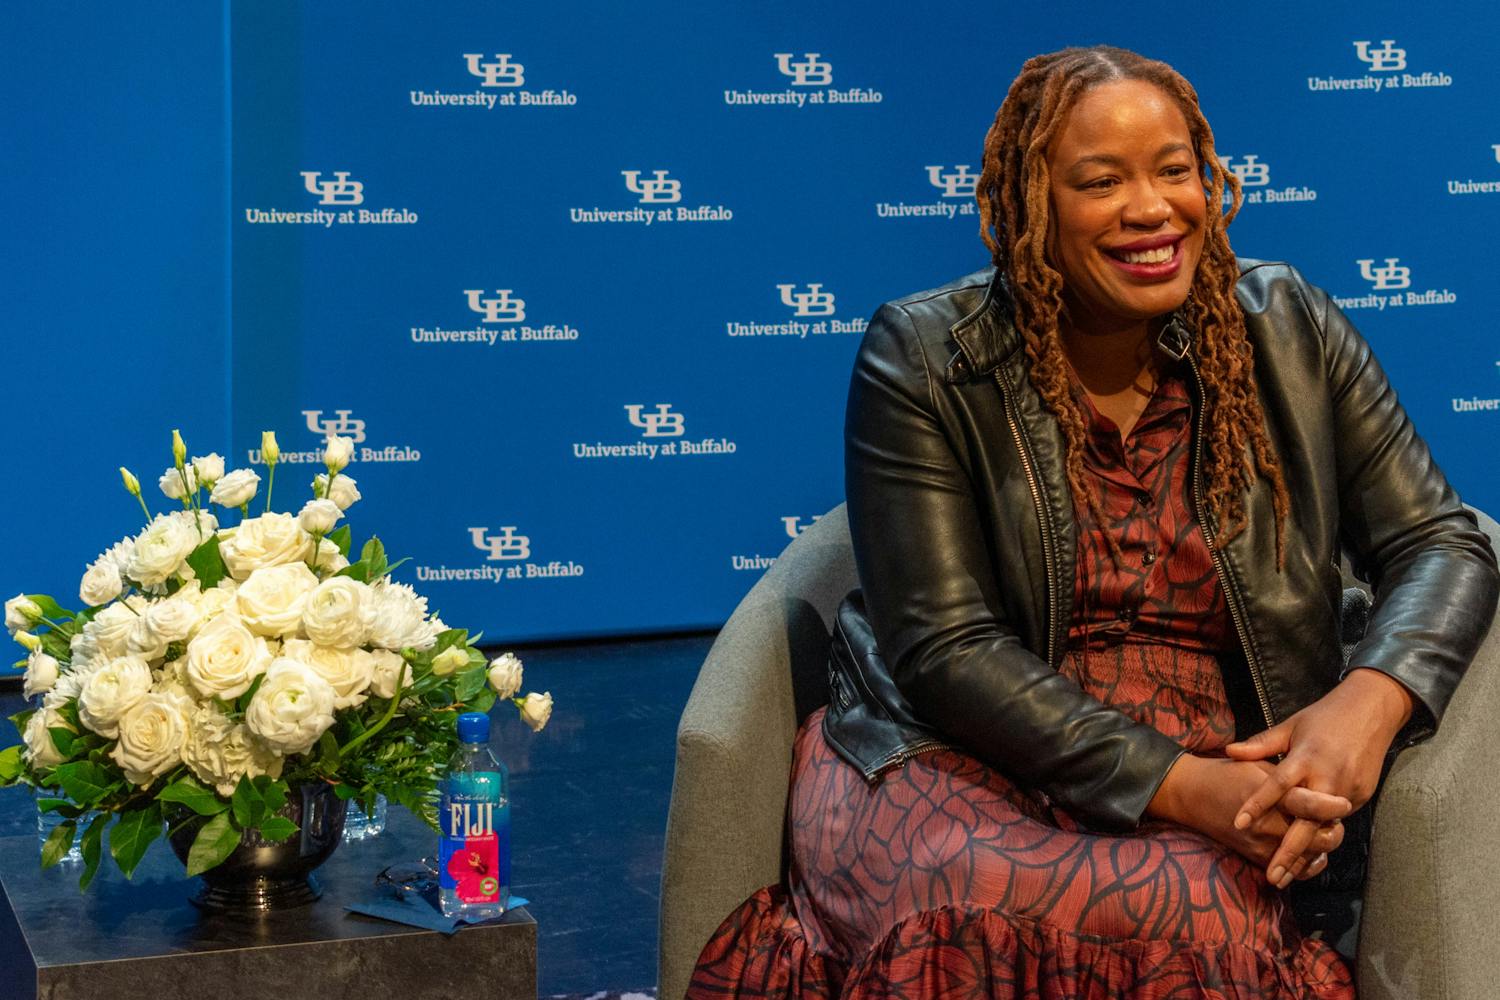 Heather McGhee's “The Sum of Us” records her journey across America to dive deep into the country’s racial and social inequalities.